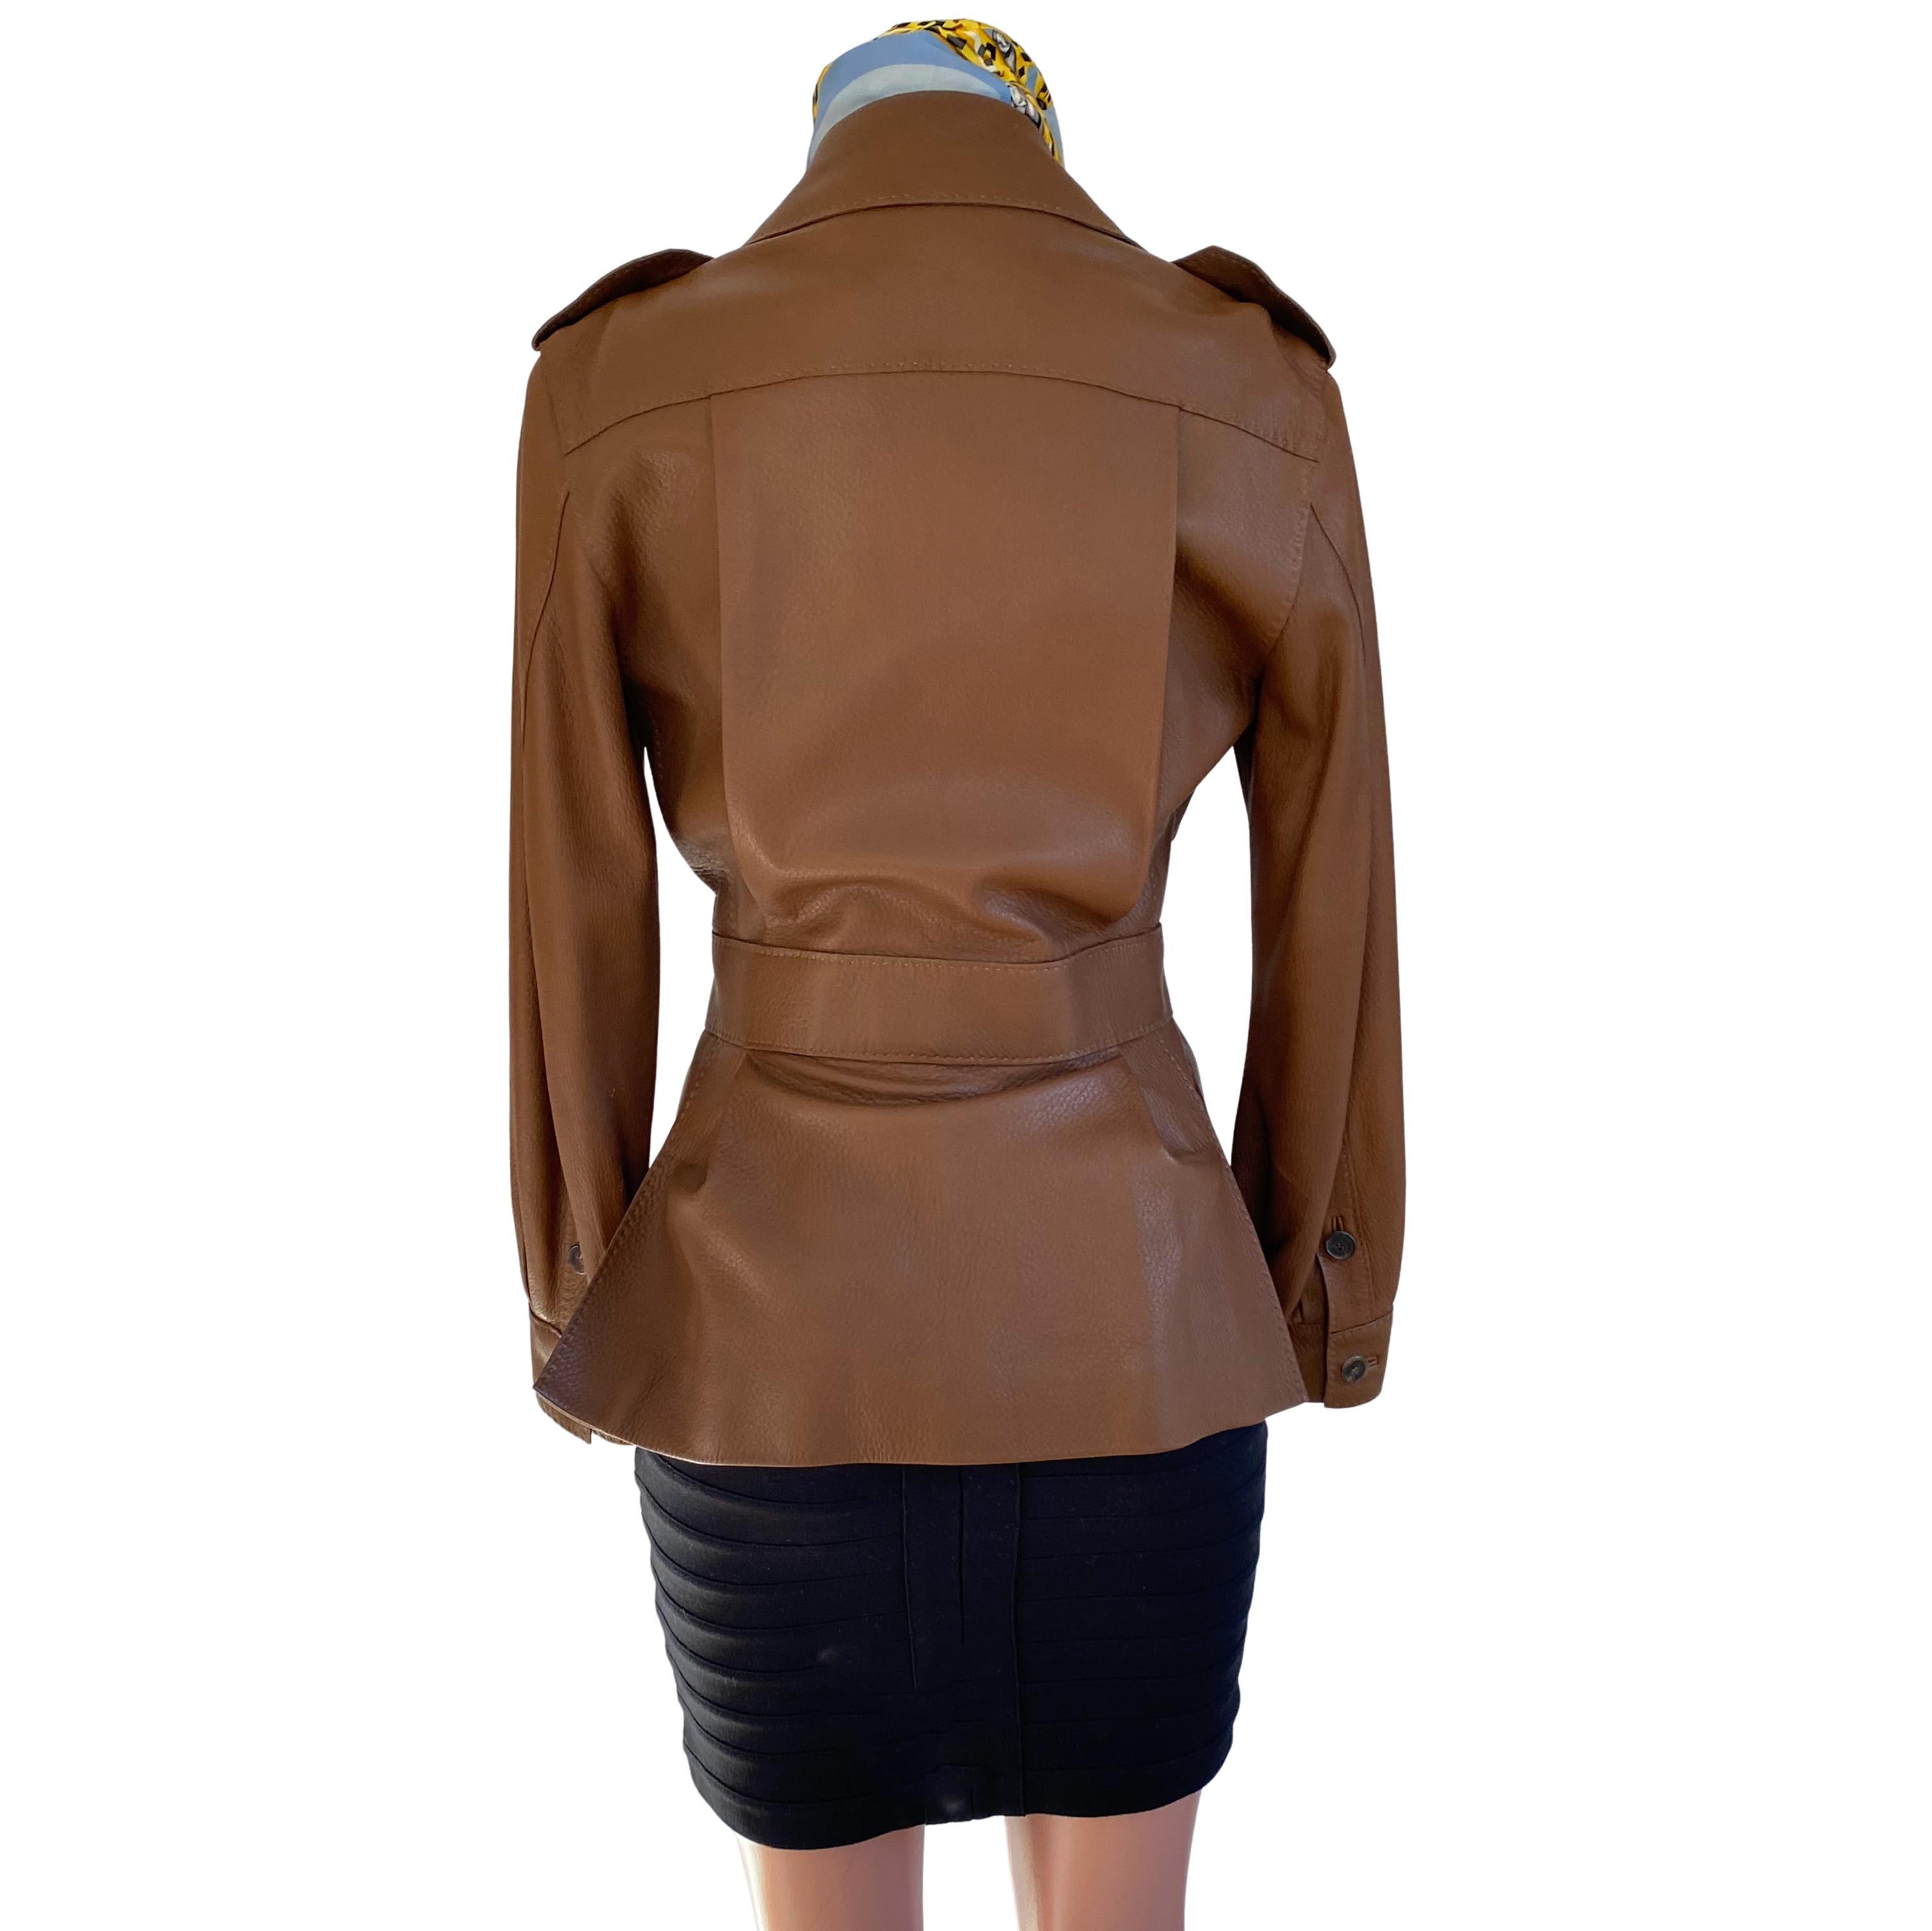 Black Hermès Saddle Leather Safari Biker Jacket with Logo Buttons and Silk Lining For Sale